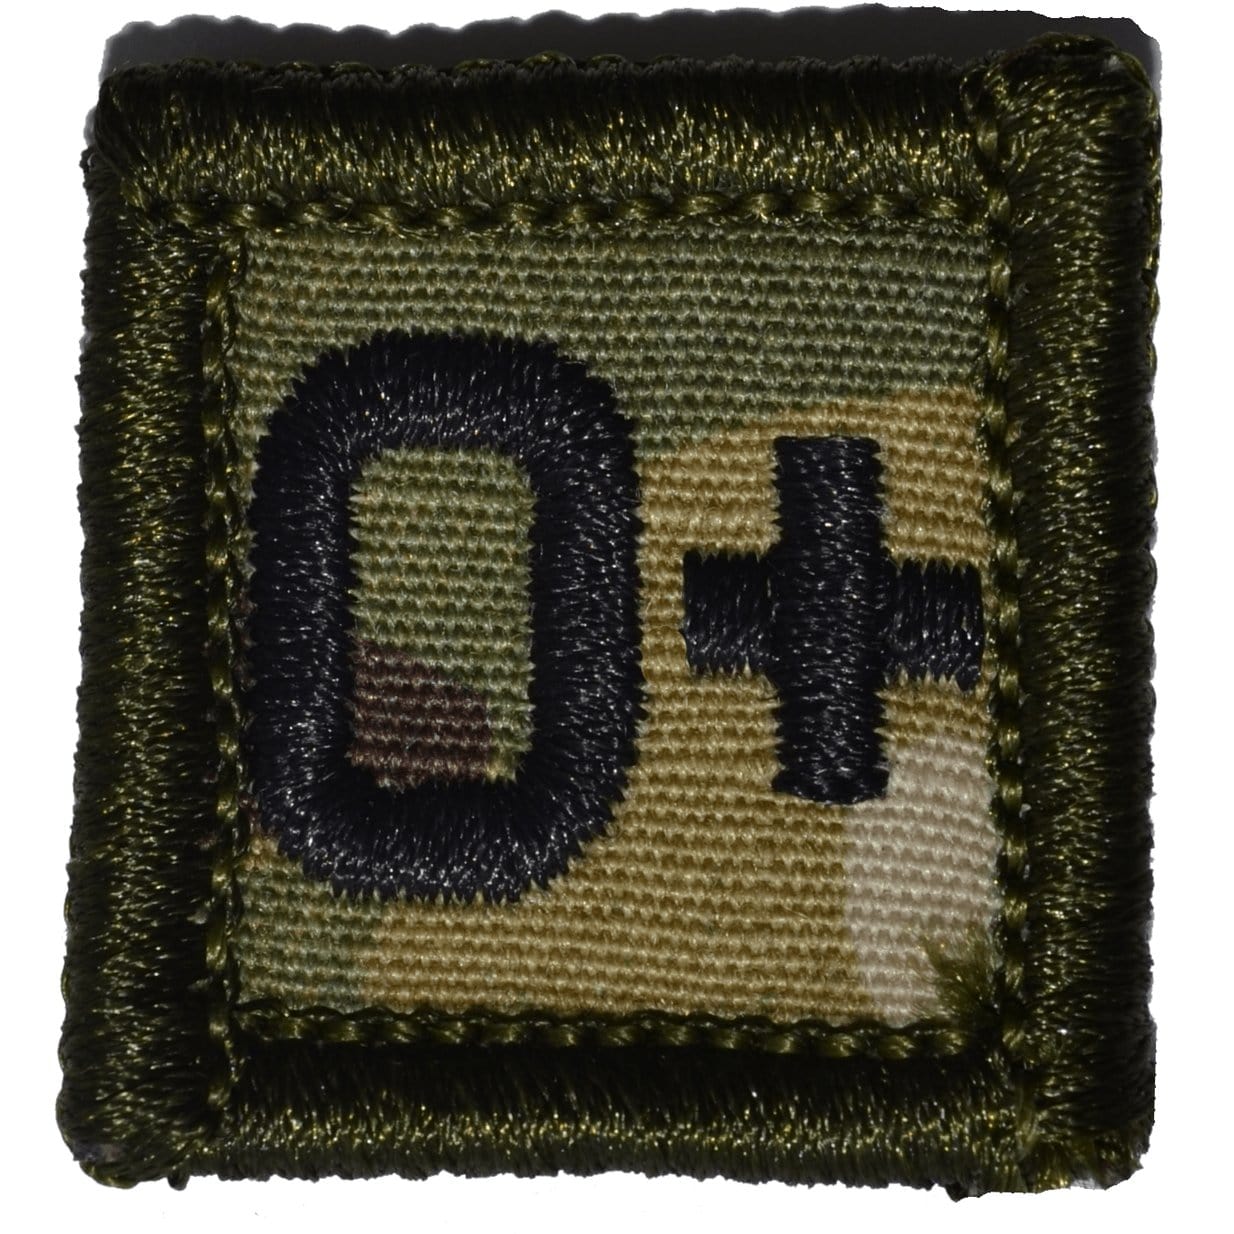 Blood Type - 1x1 Patch